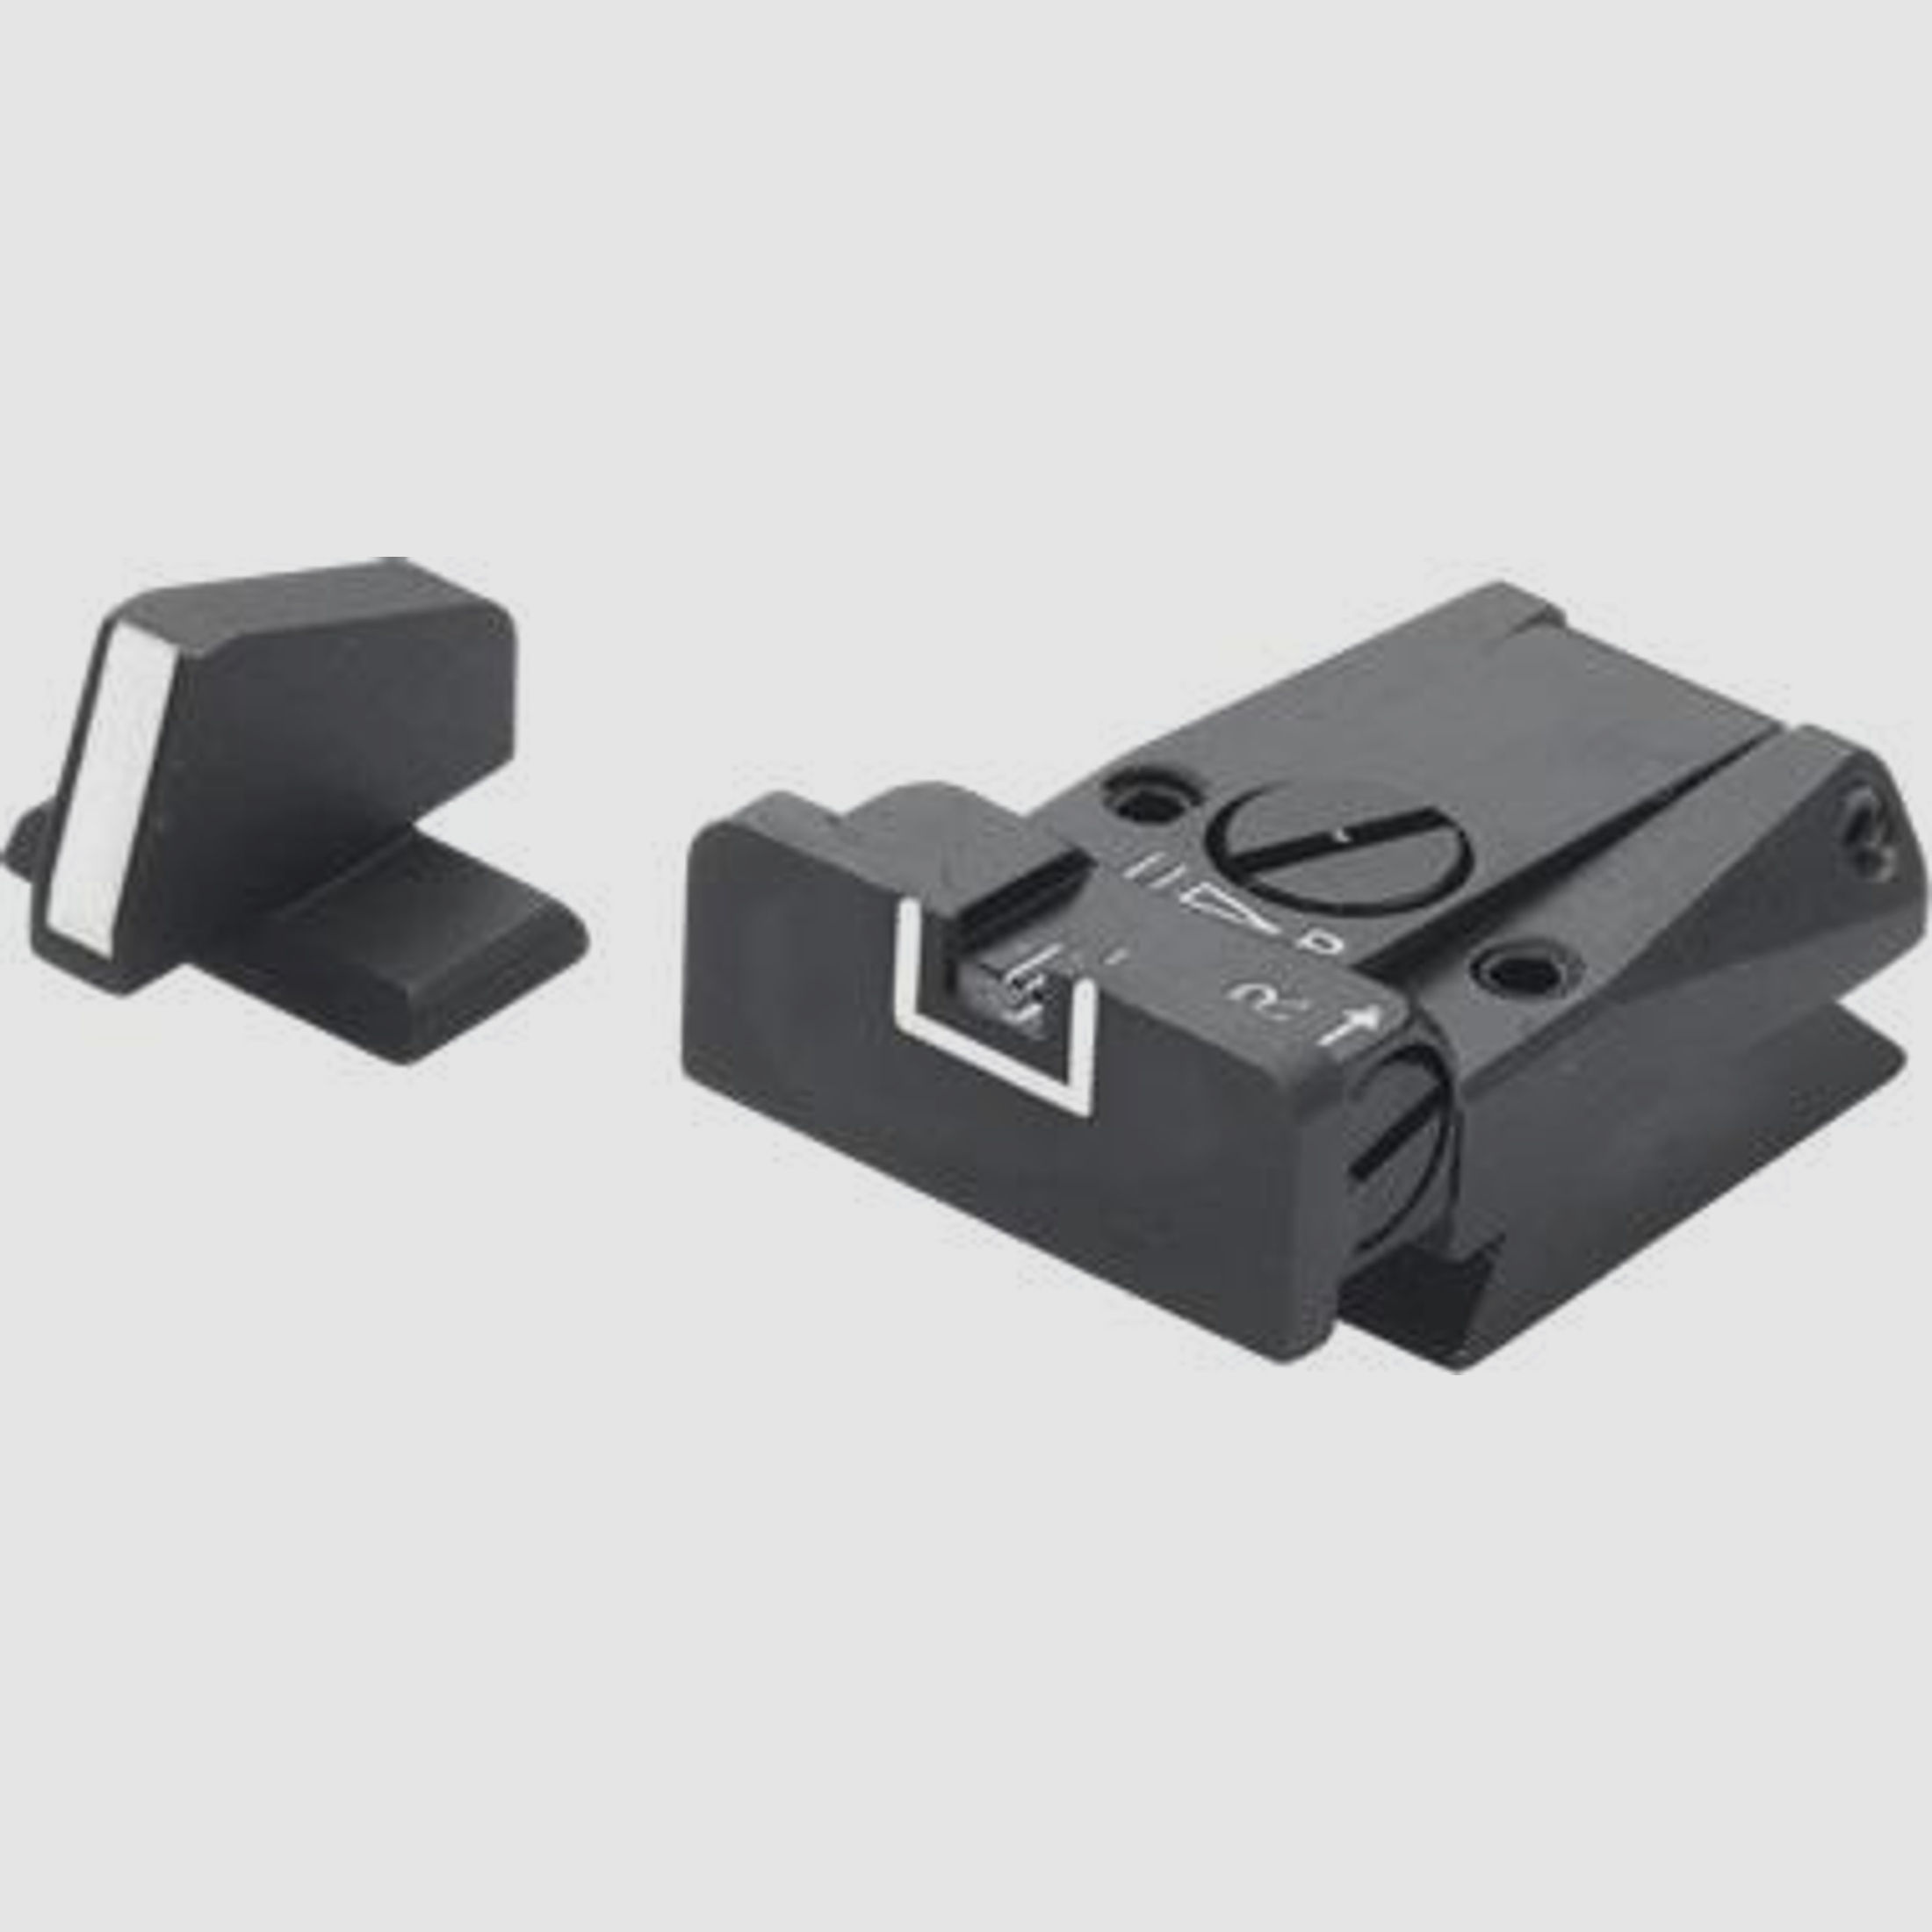 LPA Sights Visier f. H&K P7M8, P7M13, Mark23 SPR70P718 - White Outline